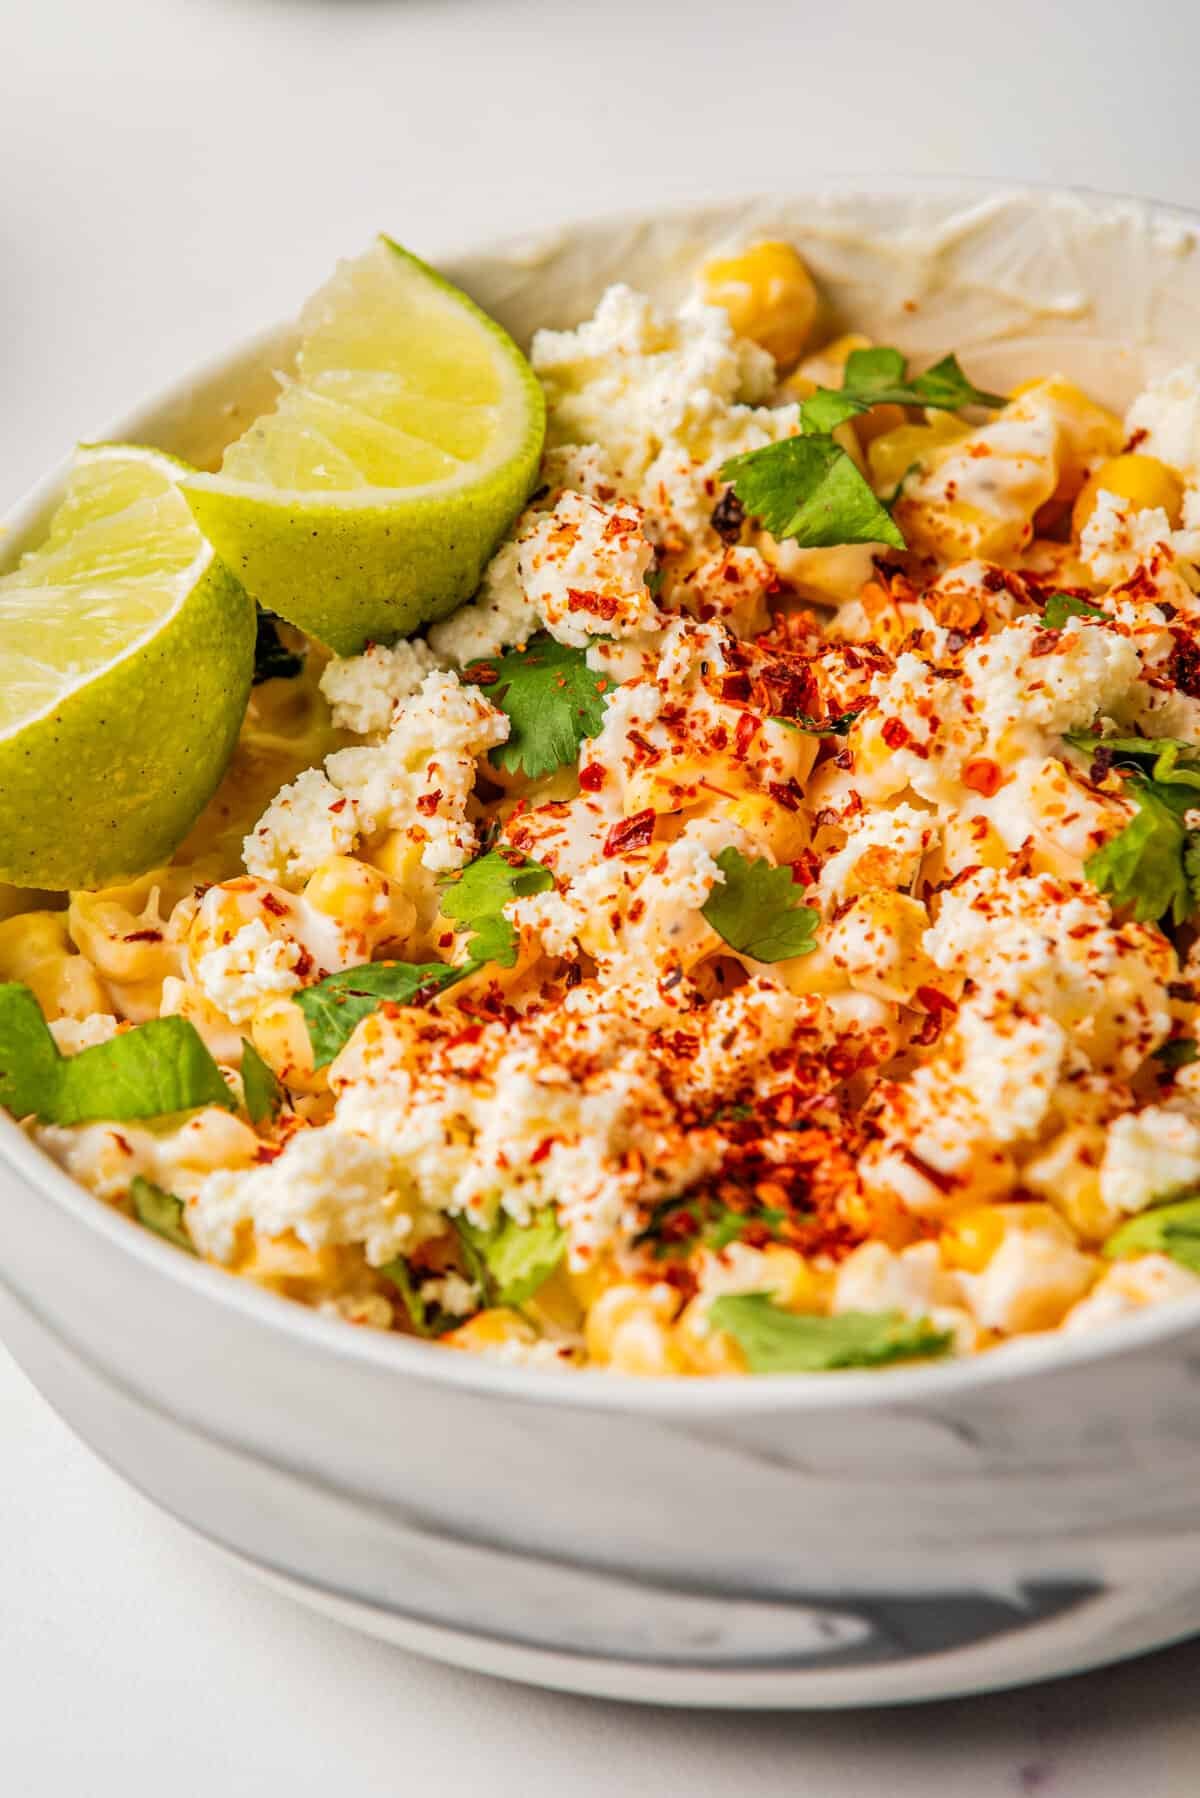 A close up image of Mexican street corn salad in a bowl with two slices of lime resting on the side.